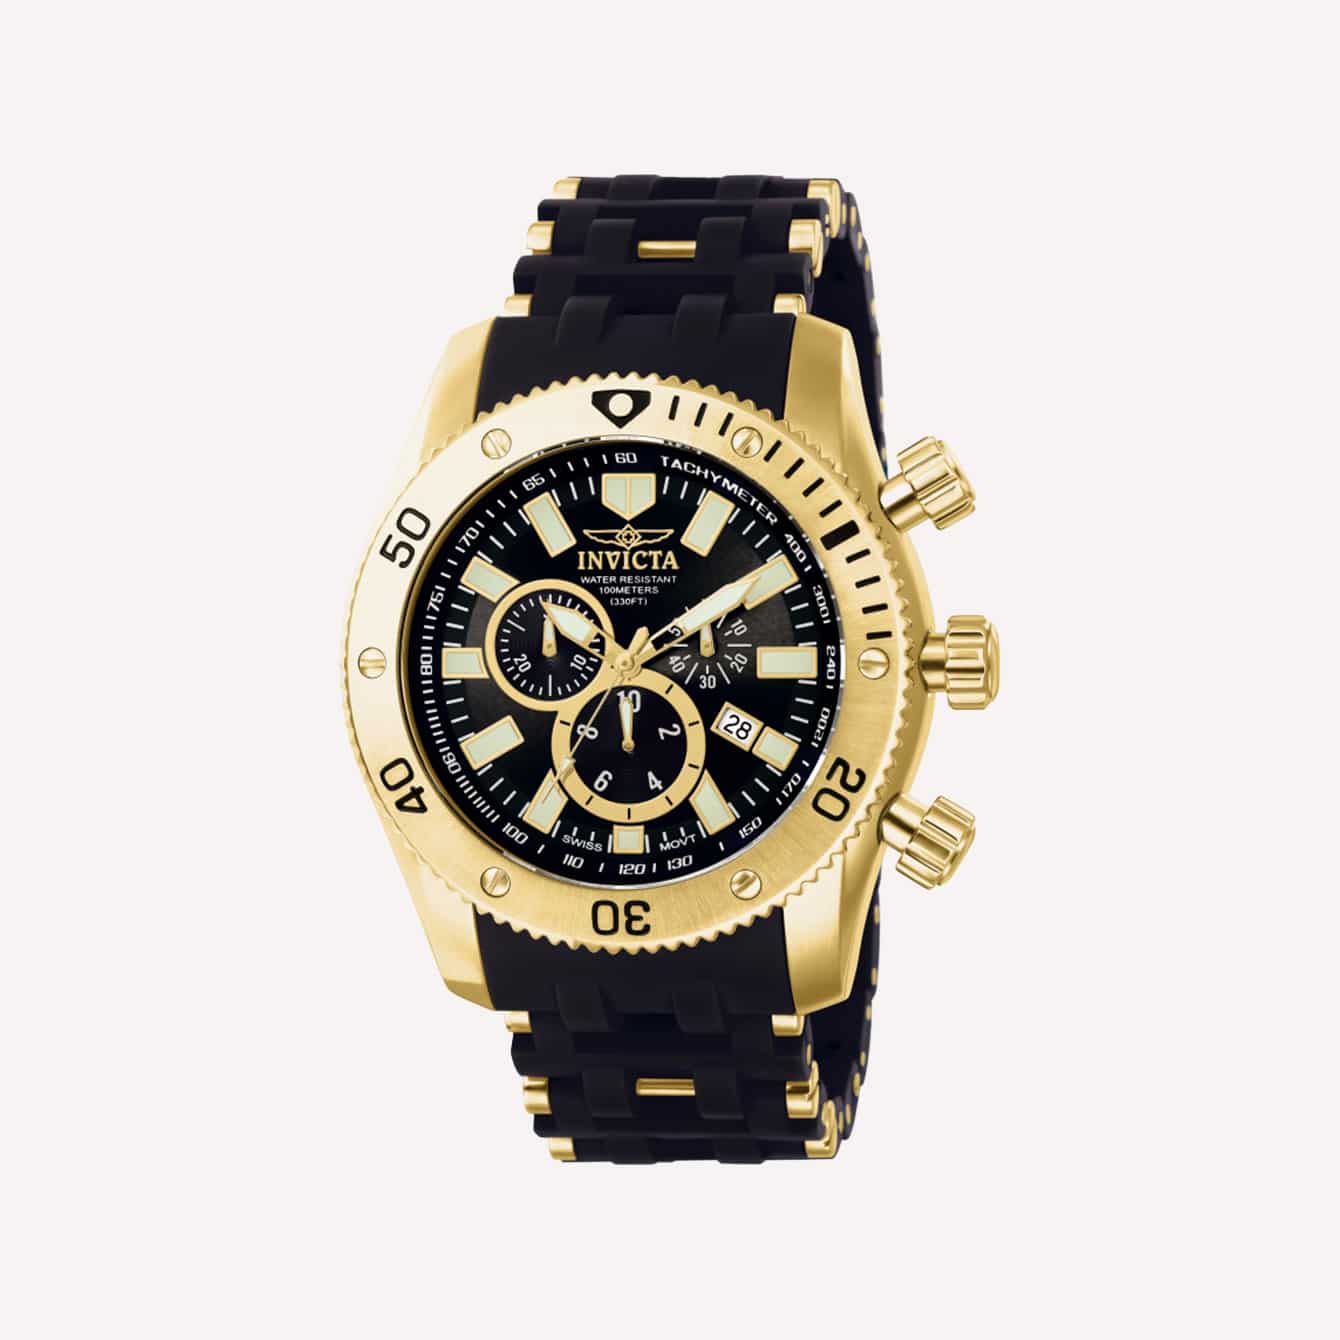 12 Best Invicta Watches (Invicta Watch Buying Guide)-7